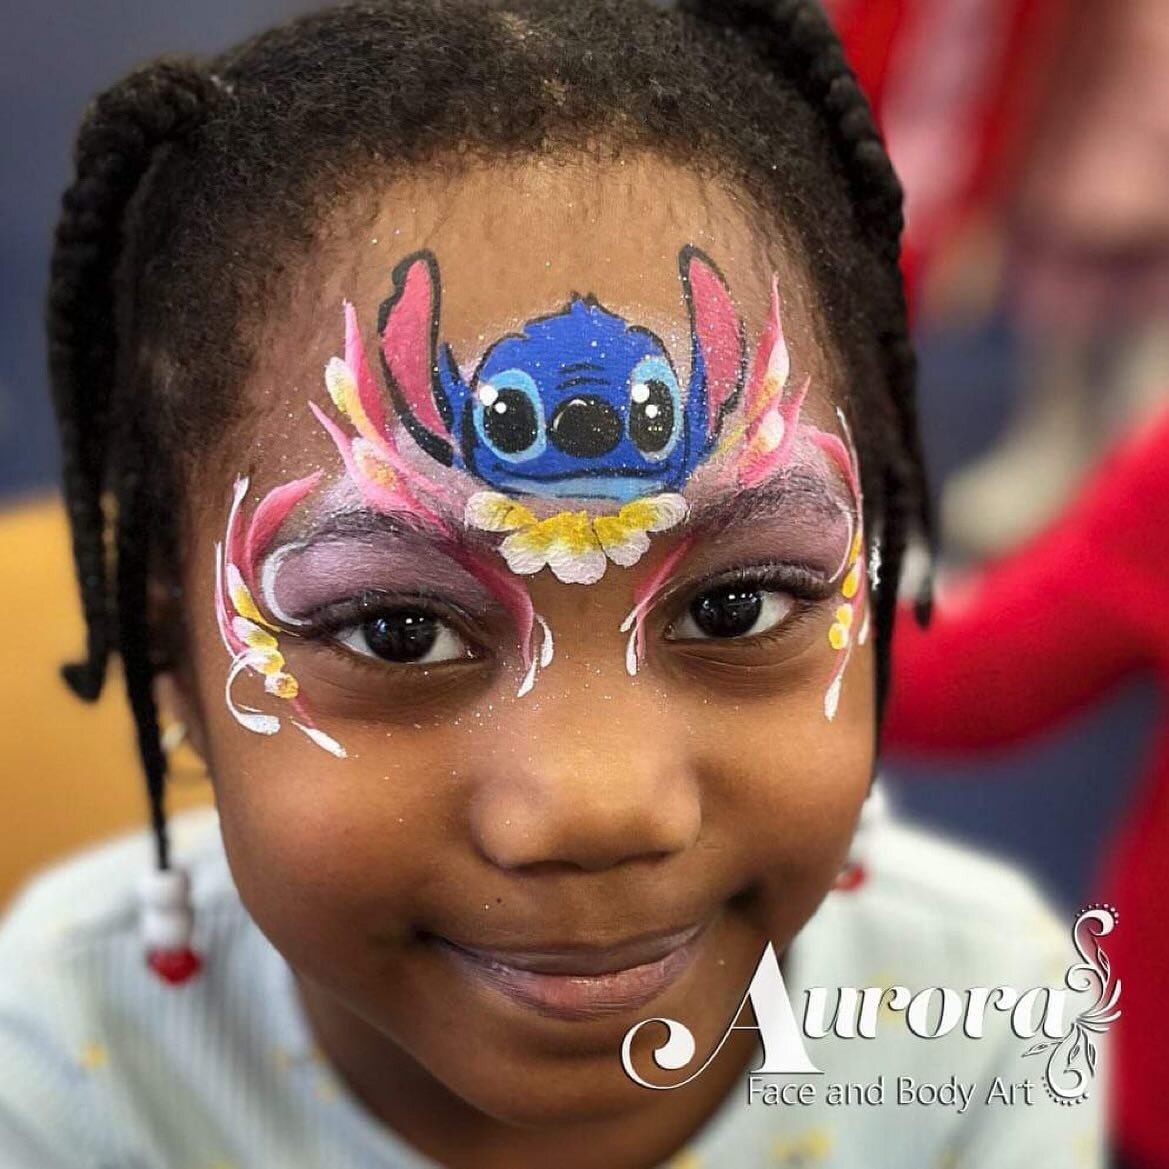 💙 Stitch is everywhere at the moment! This stencil from @popstencils is a life saver 🤪😋

#stitch #stitchfacepaint #facepaint #facepainter #facepainting #facepaintersofinstagram #facepaintersoninstagram #shareyourfacepaint #sharemyfacepaint #facepa